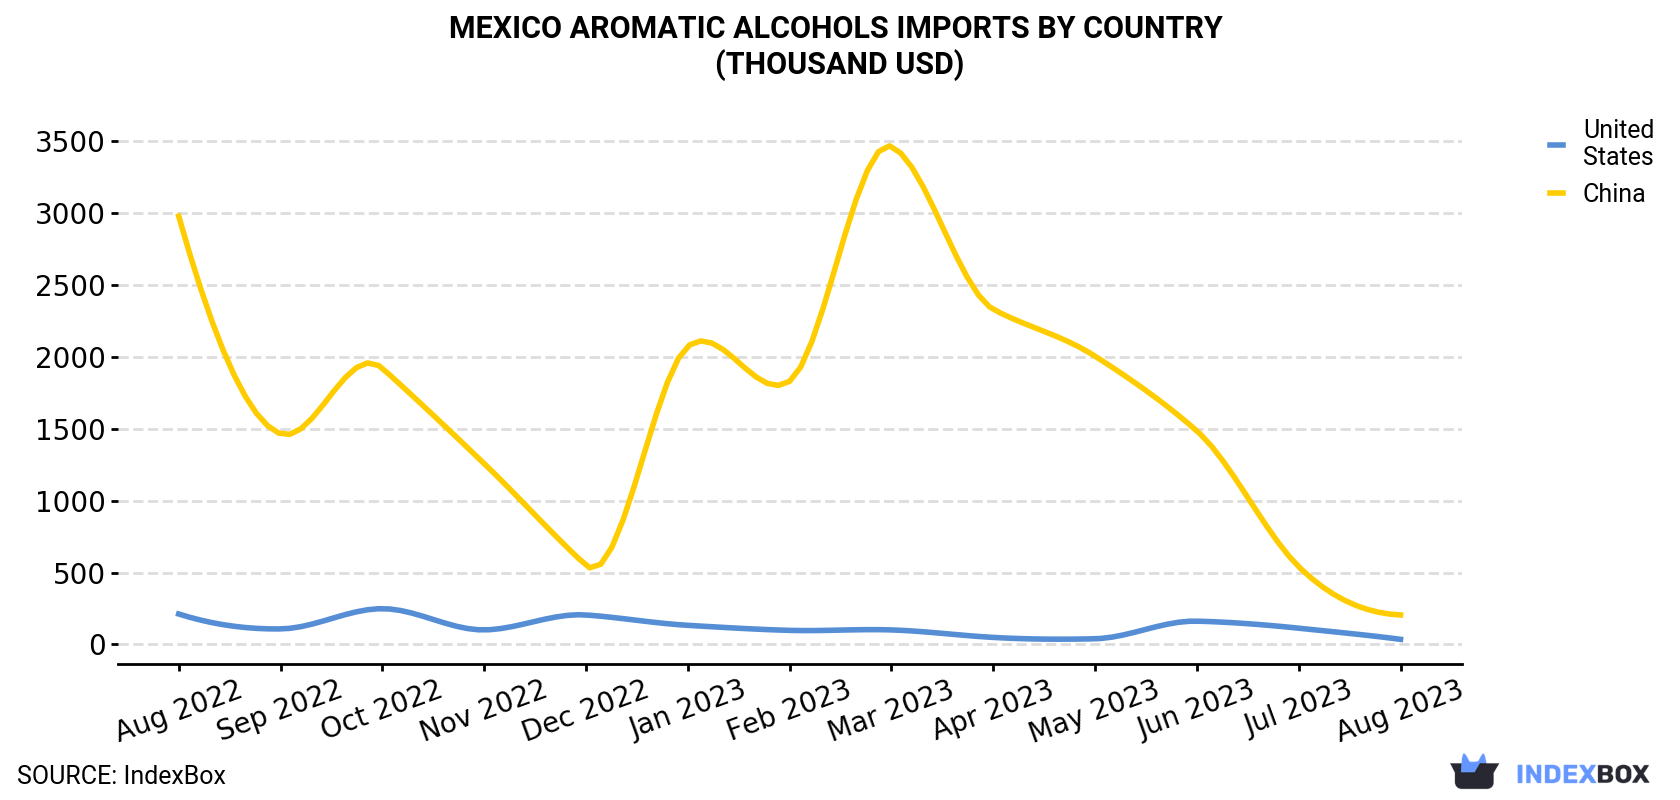 Mexico Aromatic Alcohols Imports By Country (Thousand USD)